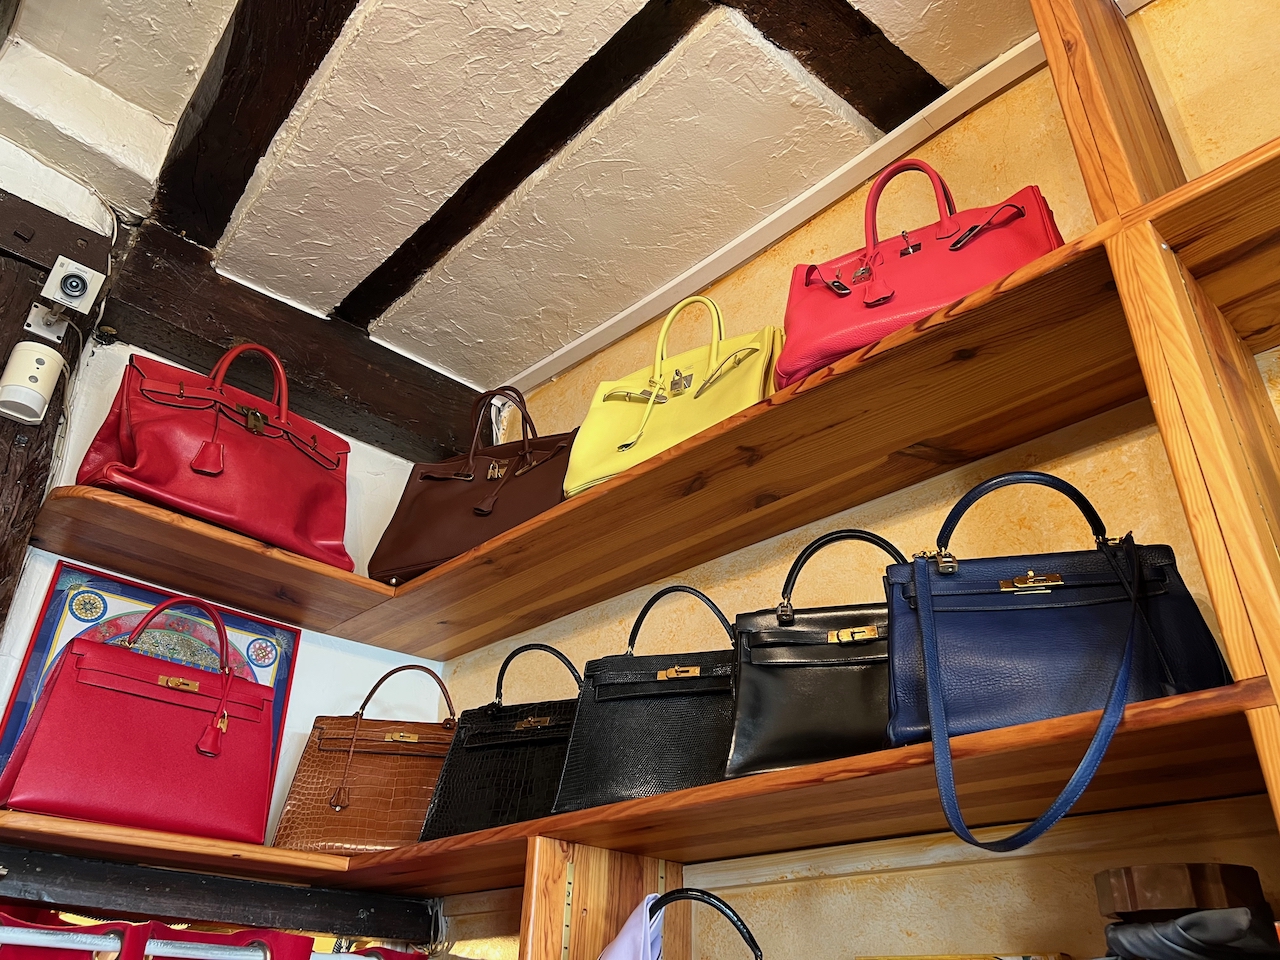 Some of the bags for sale at Les 3 Marches. Photo via @The_Notorious_Pink